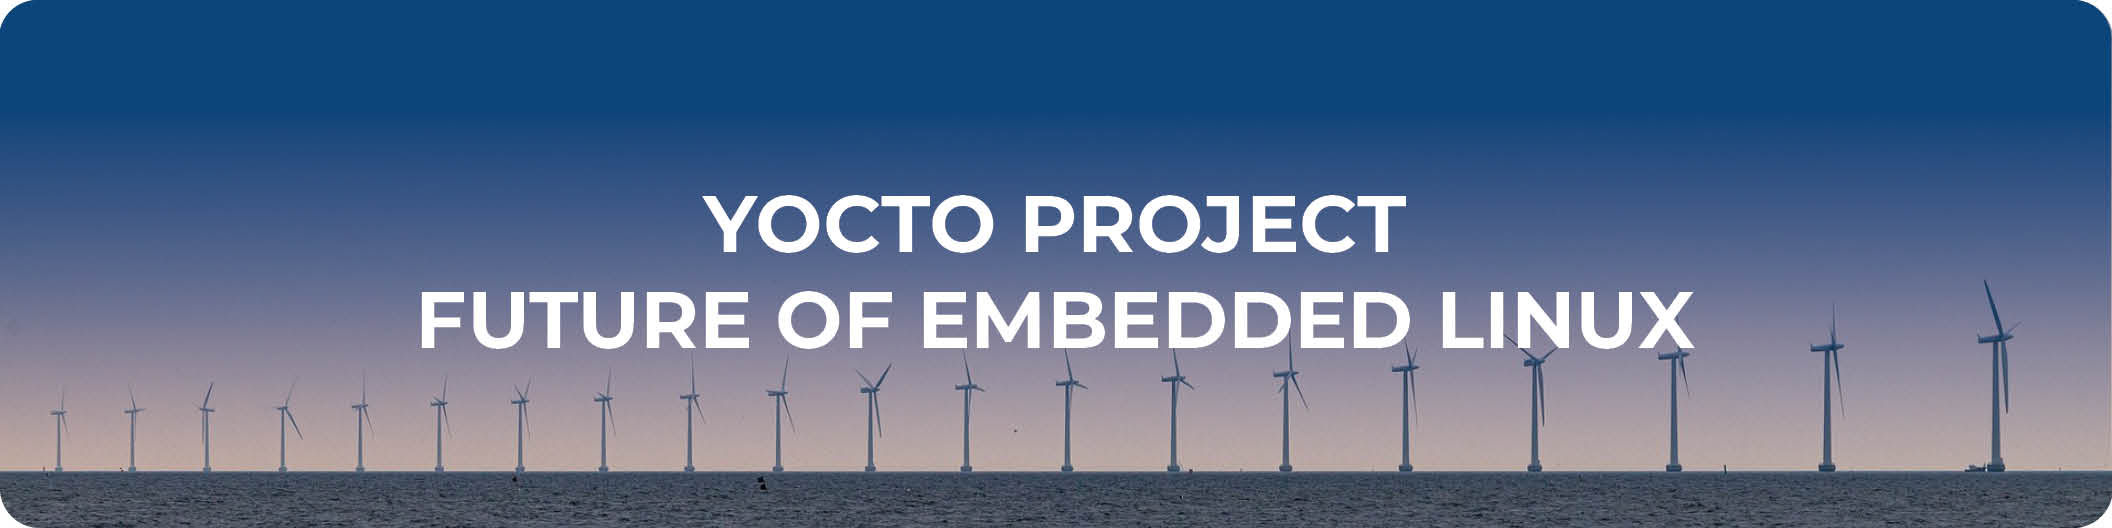 Yocto project - future of embedded Linux